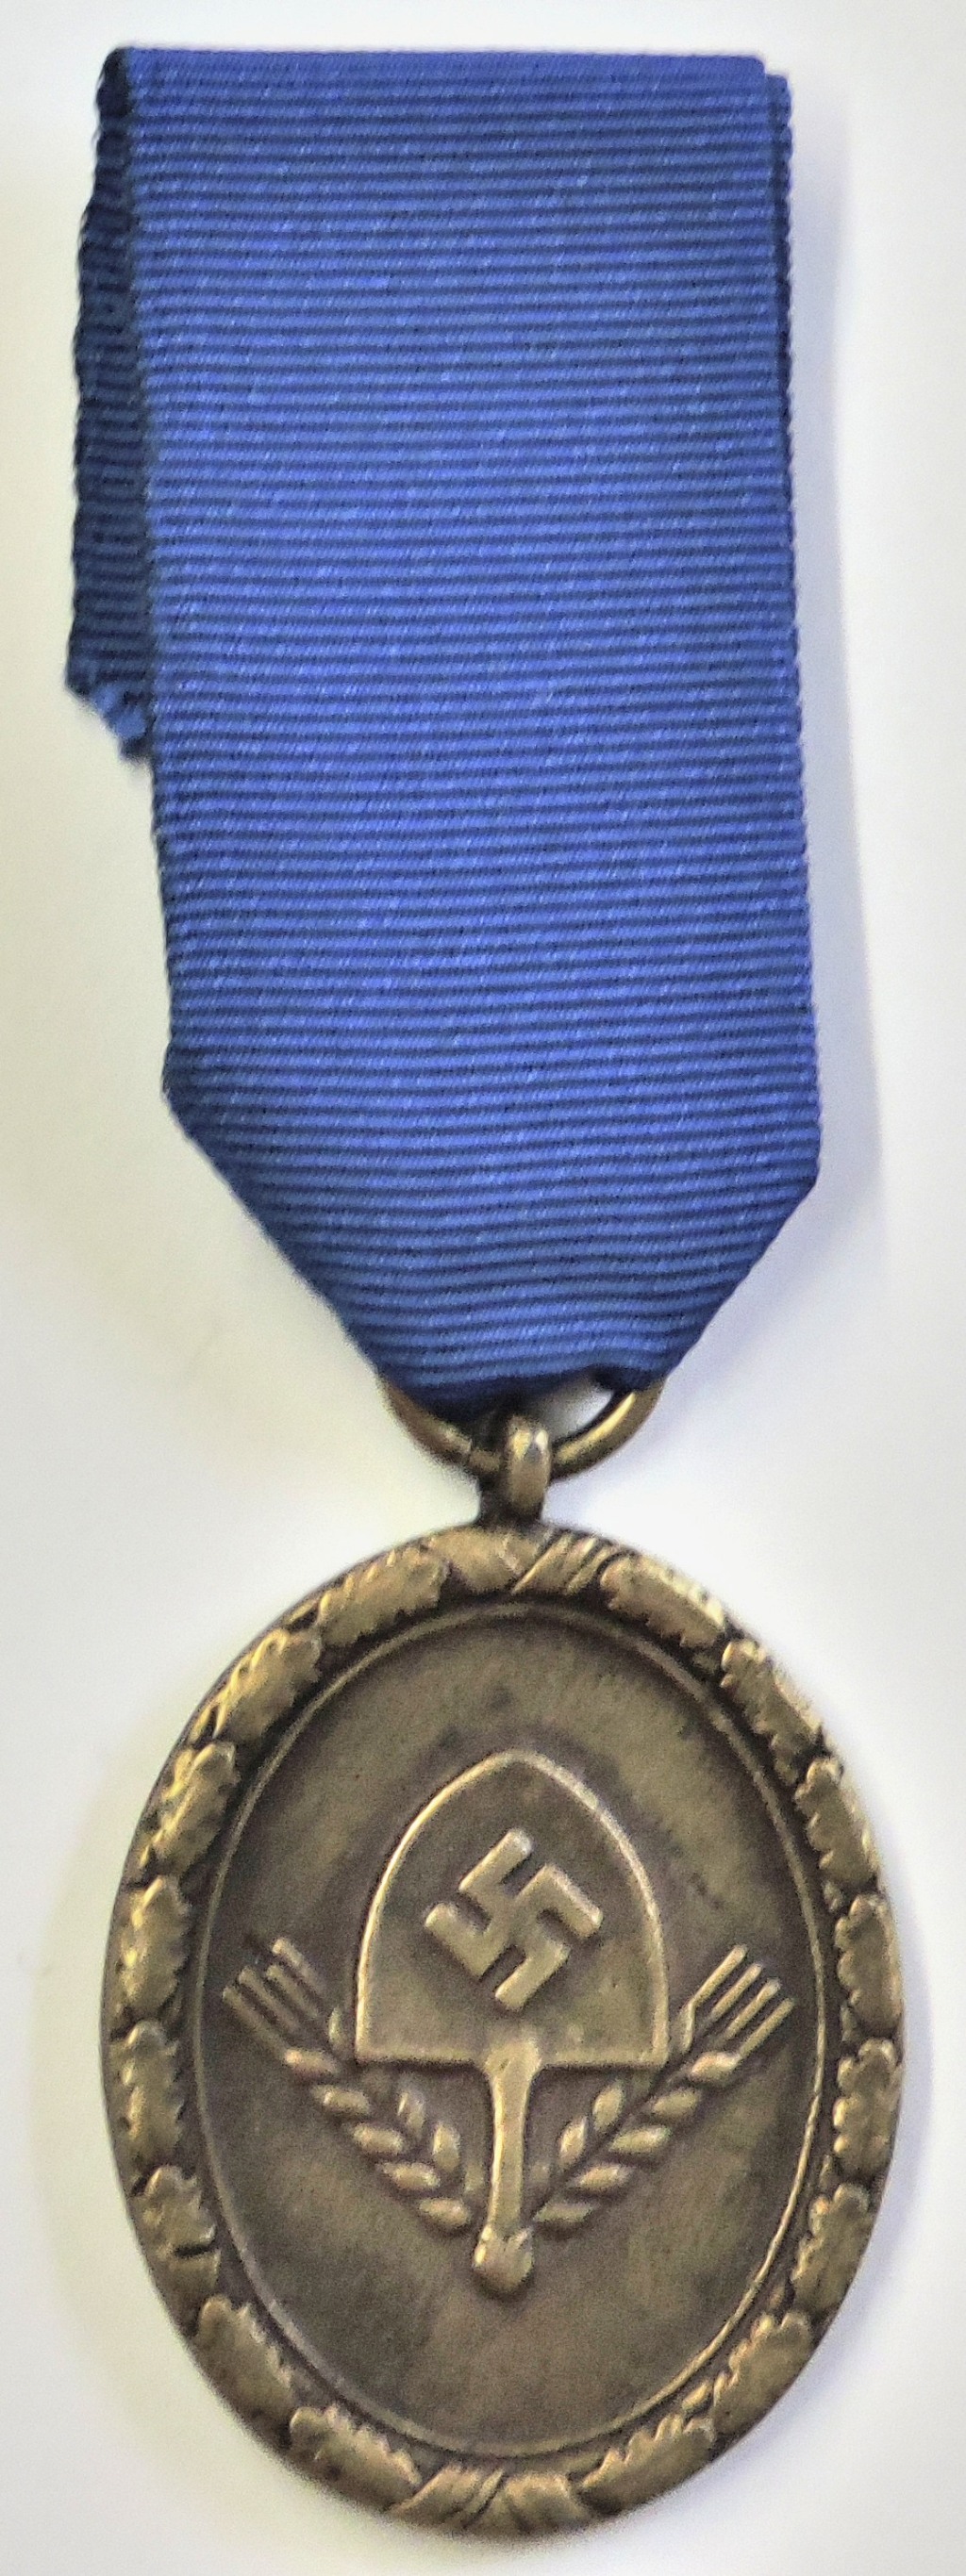 German WWII RLB Labour Long Service and Good Conduct medal, see T&C's